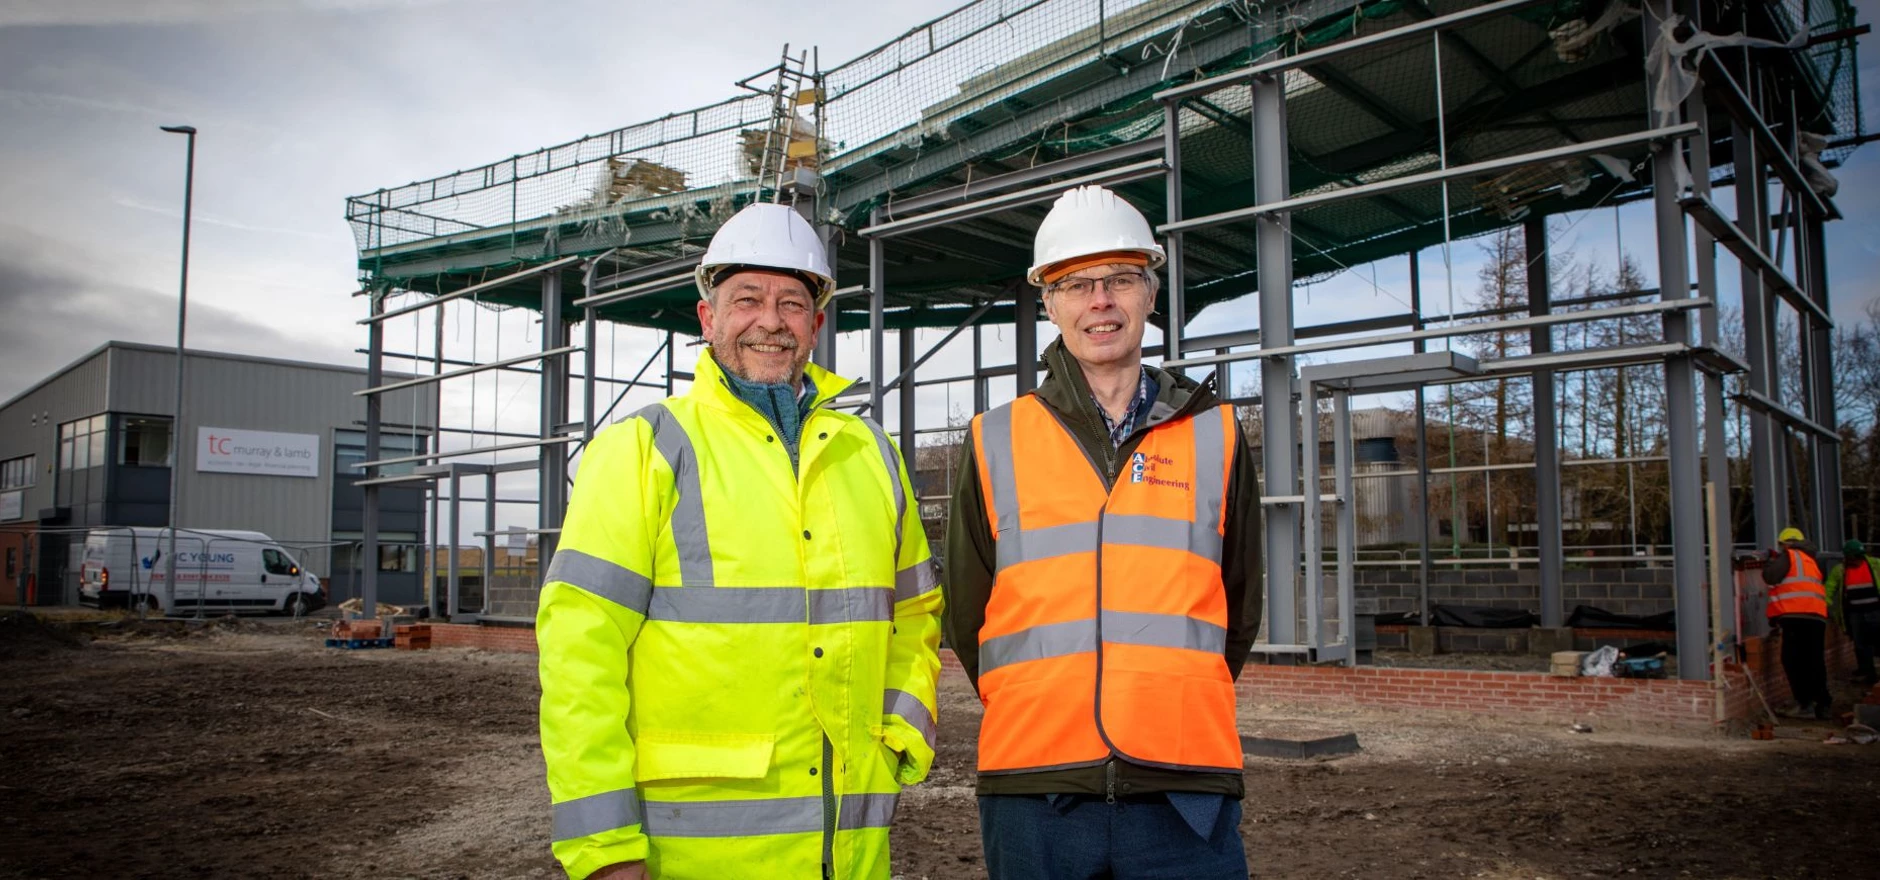  Mike Clark, Director of Project Genesis Ltd (PGL) and Ray Browning, Senior Programme Manager at the North East Local Enterprise Partnership, at Bessemer Court.